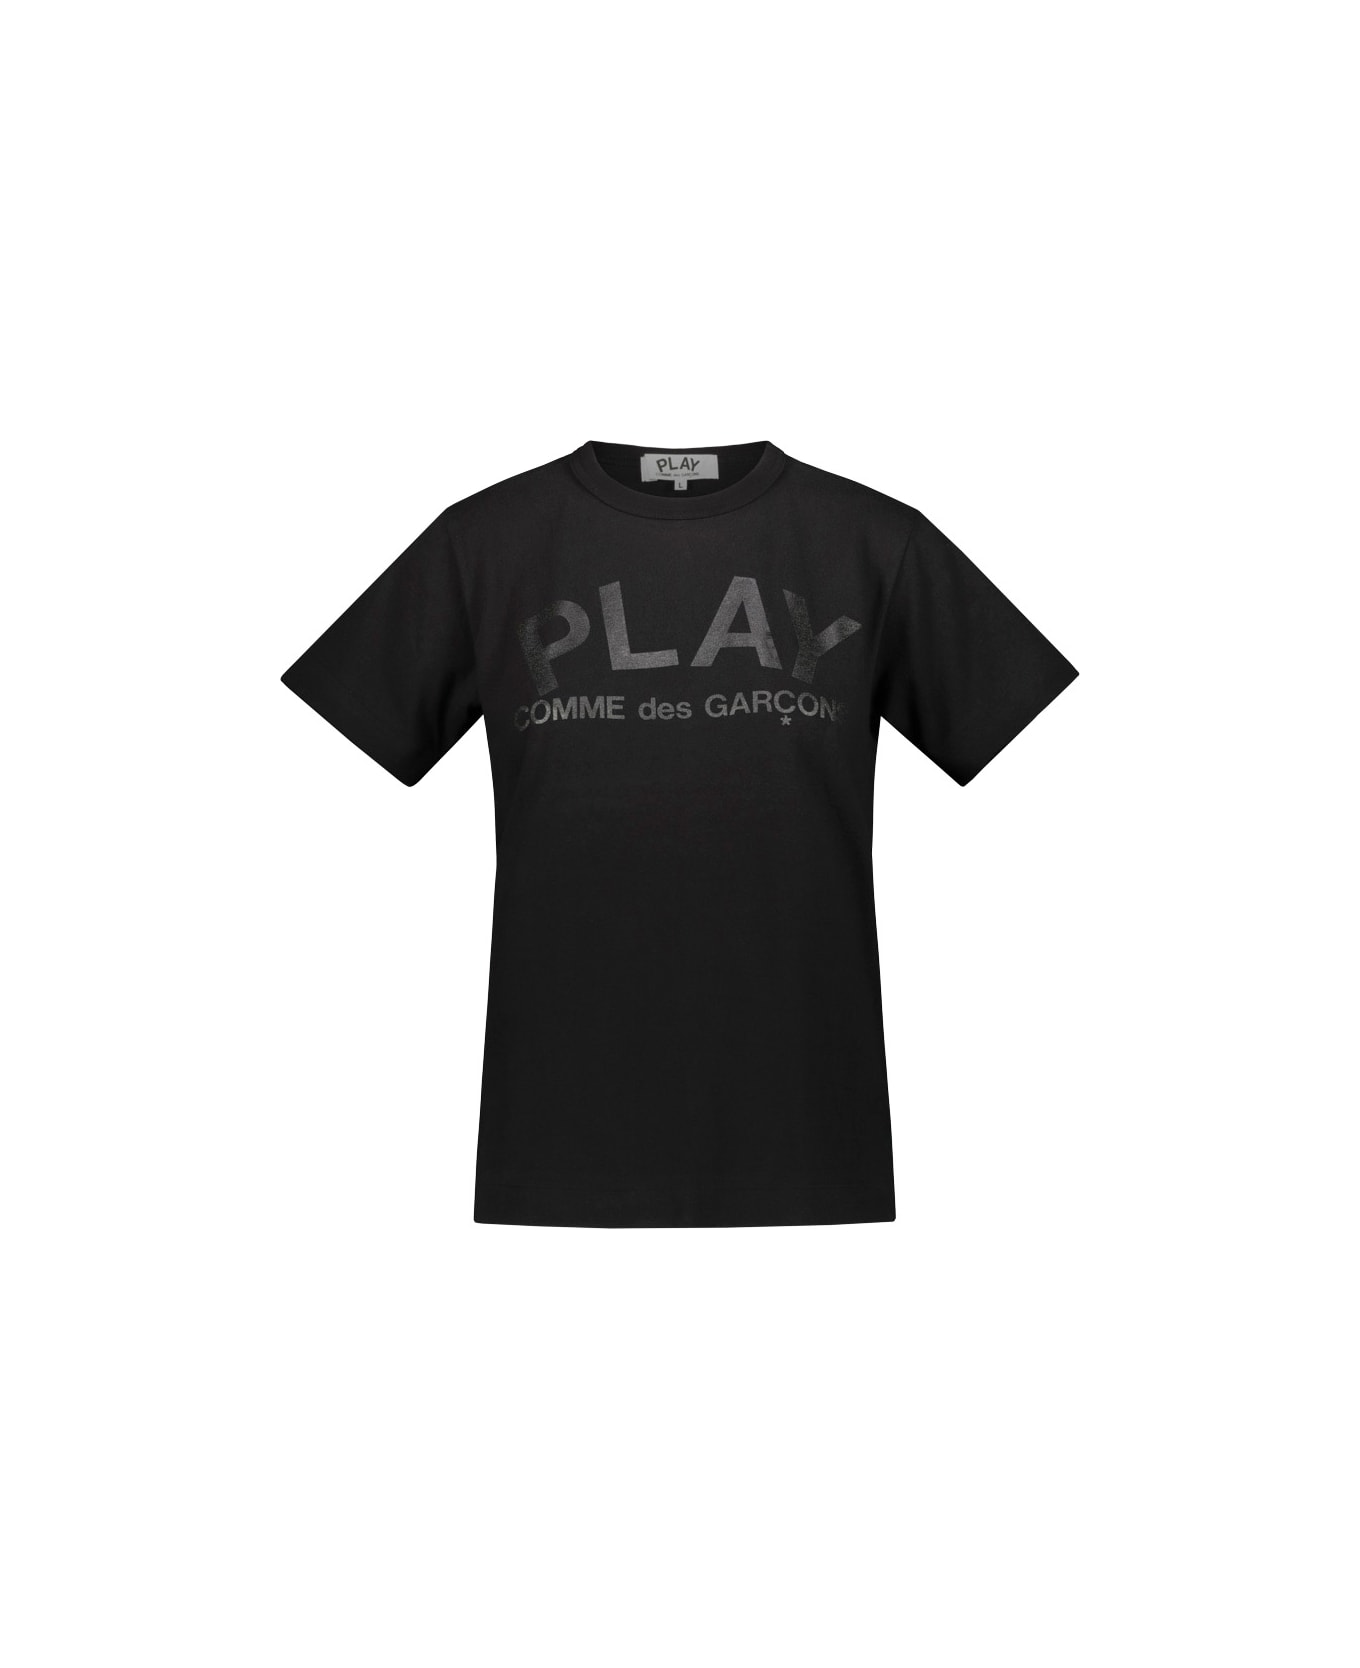 Comme des Garçons Play Black Short Sleeve T-shirt With Black Printed Logo On The Front And Back - Blk